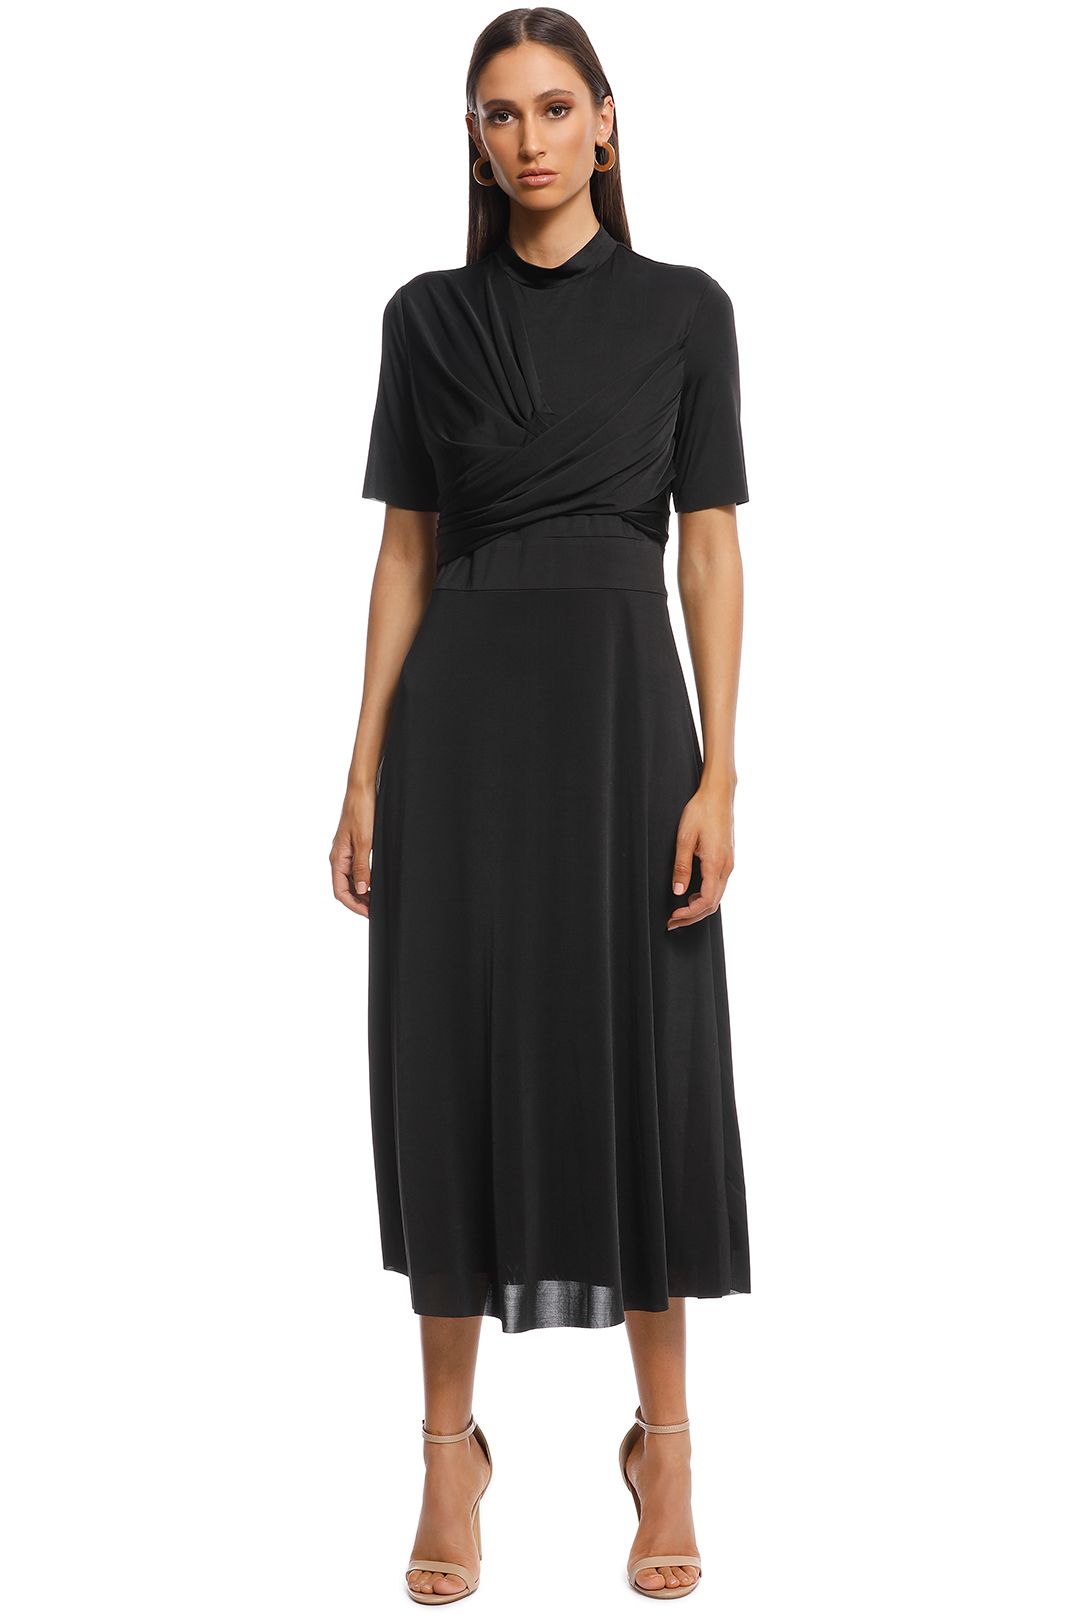 Camilla and Marc - Sequoia Slinky Dress - Black - Front